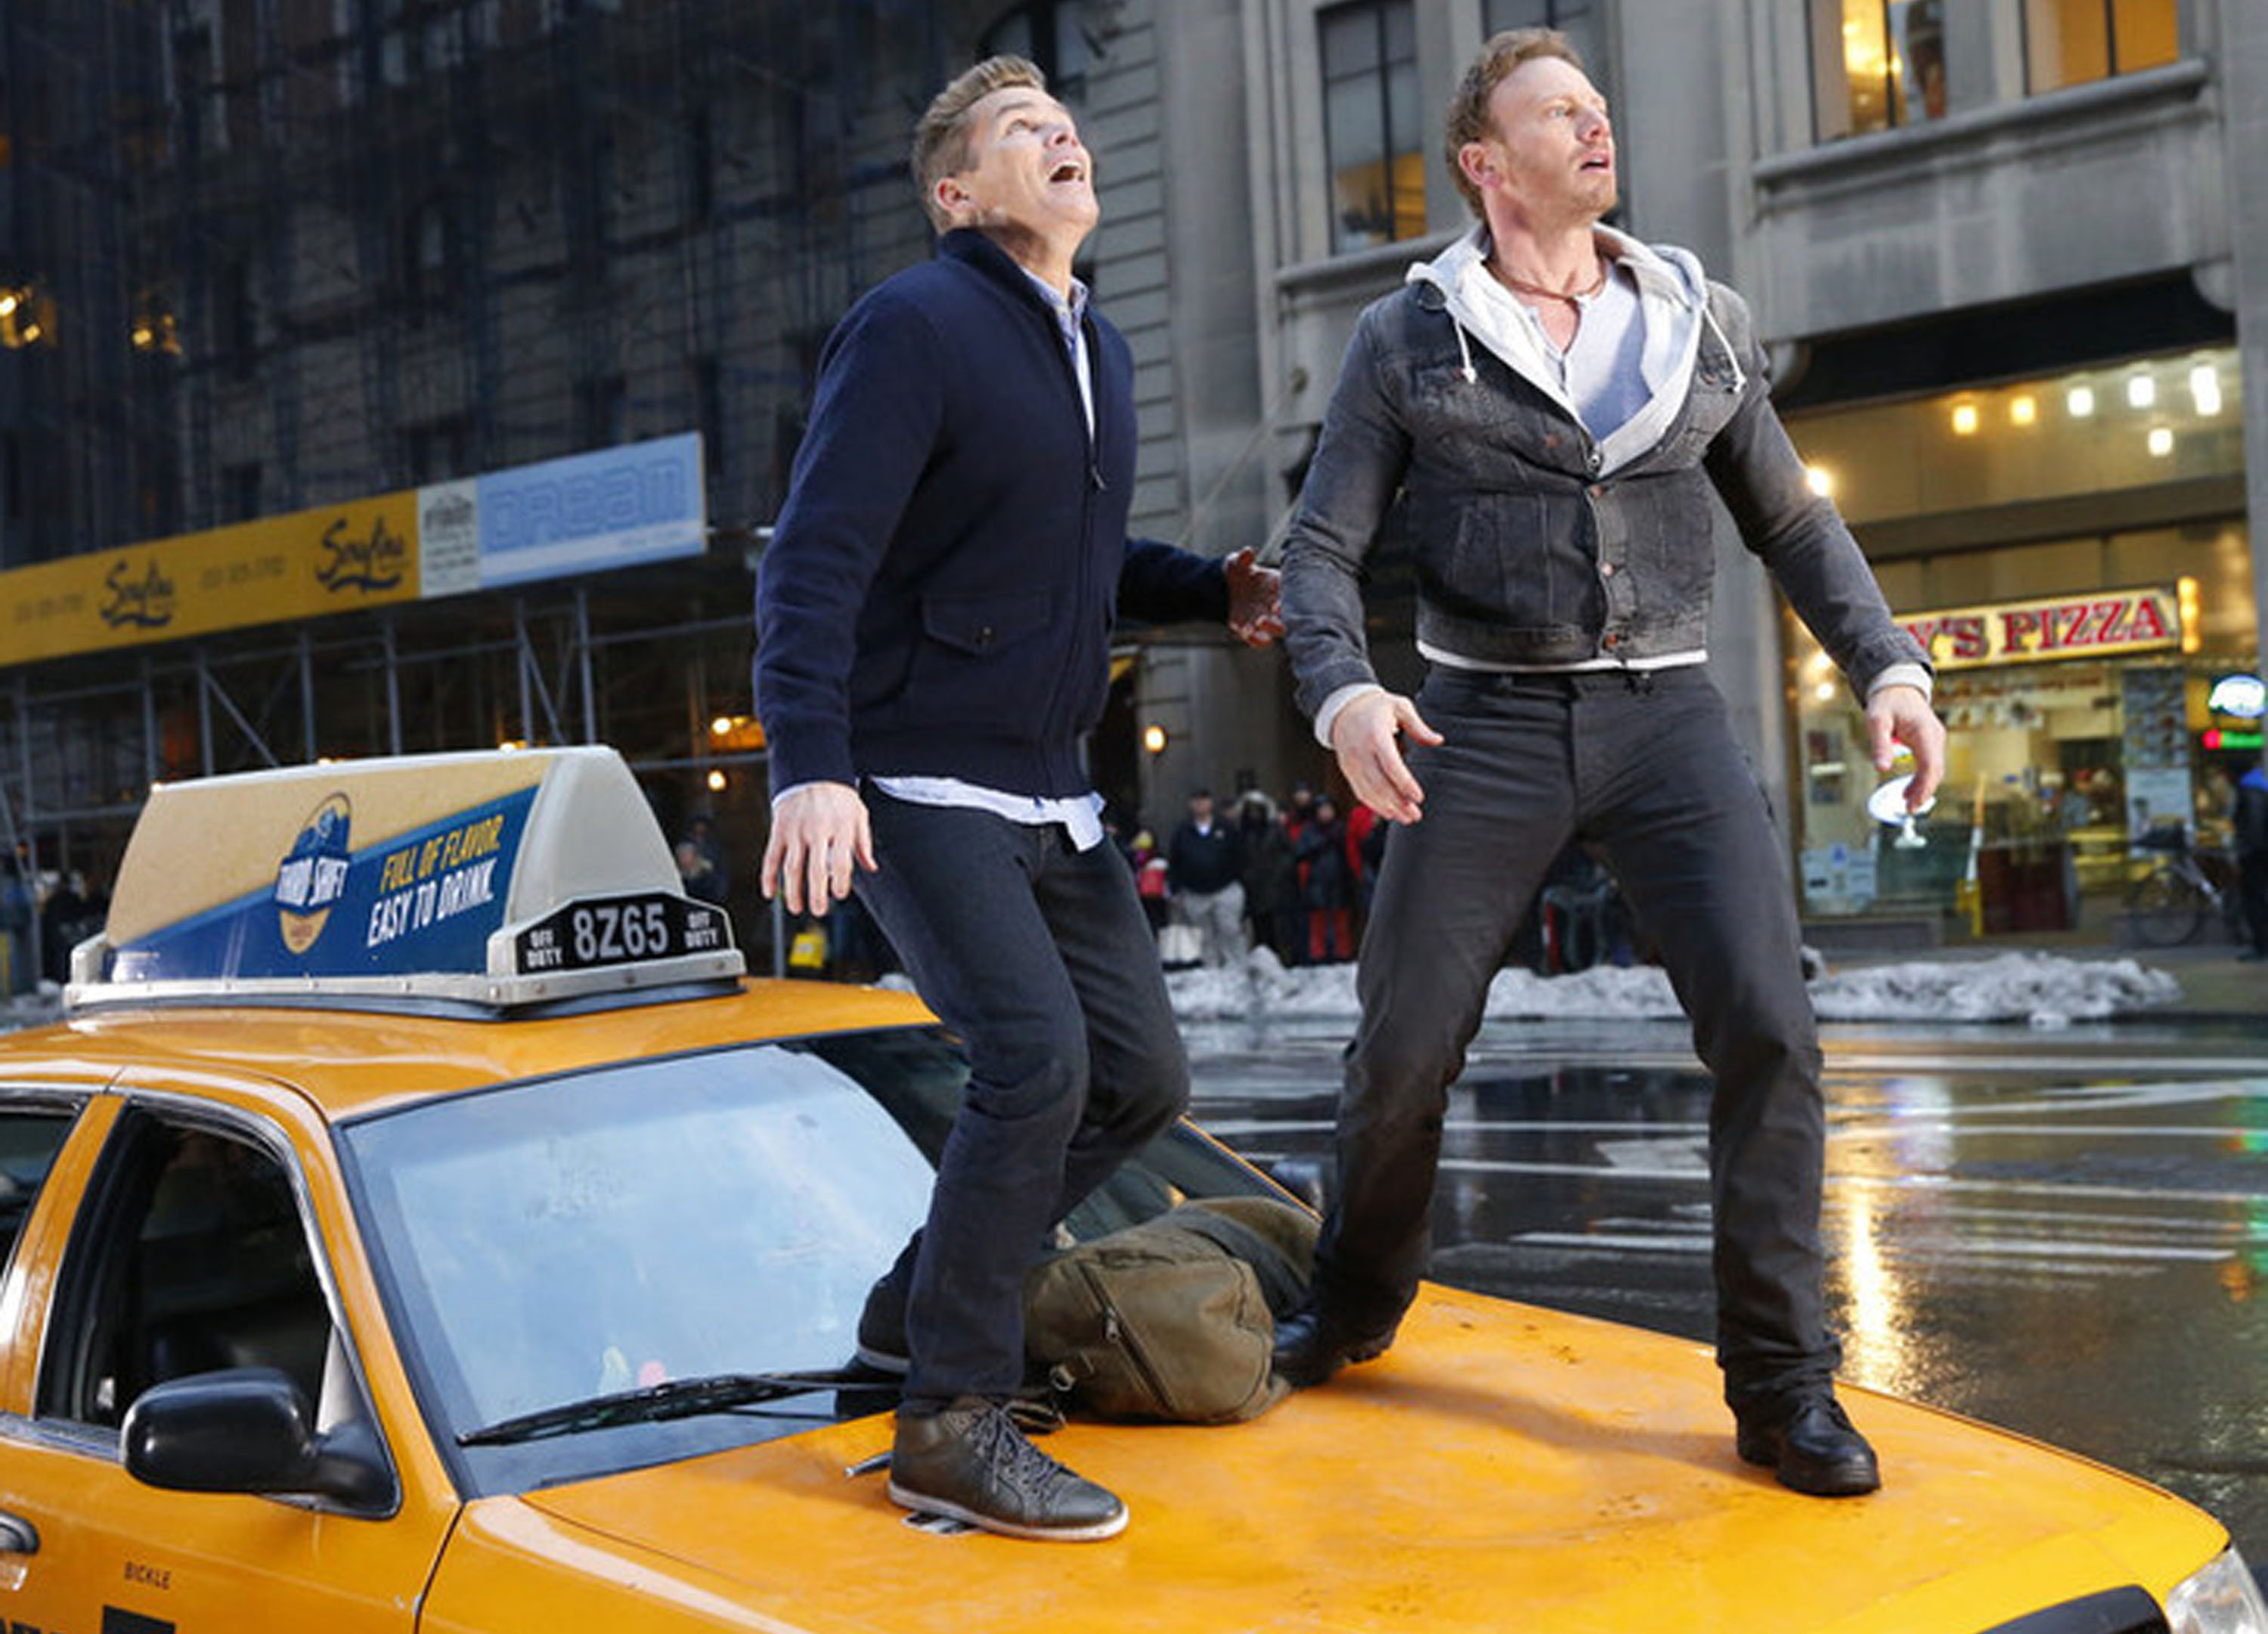 SHARKNADO 2: The Second One -- Pictured: (l-r) Mark McGrath as Martin Brody, Ian Ziering as Fin Shepard -- (Photo by: Will Hart/Syfy)